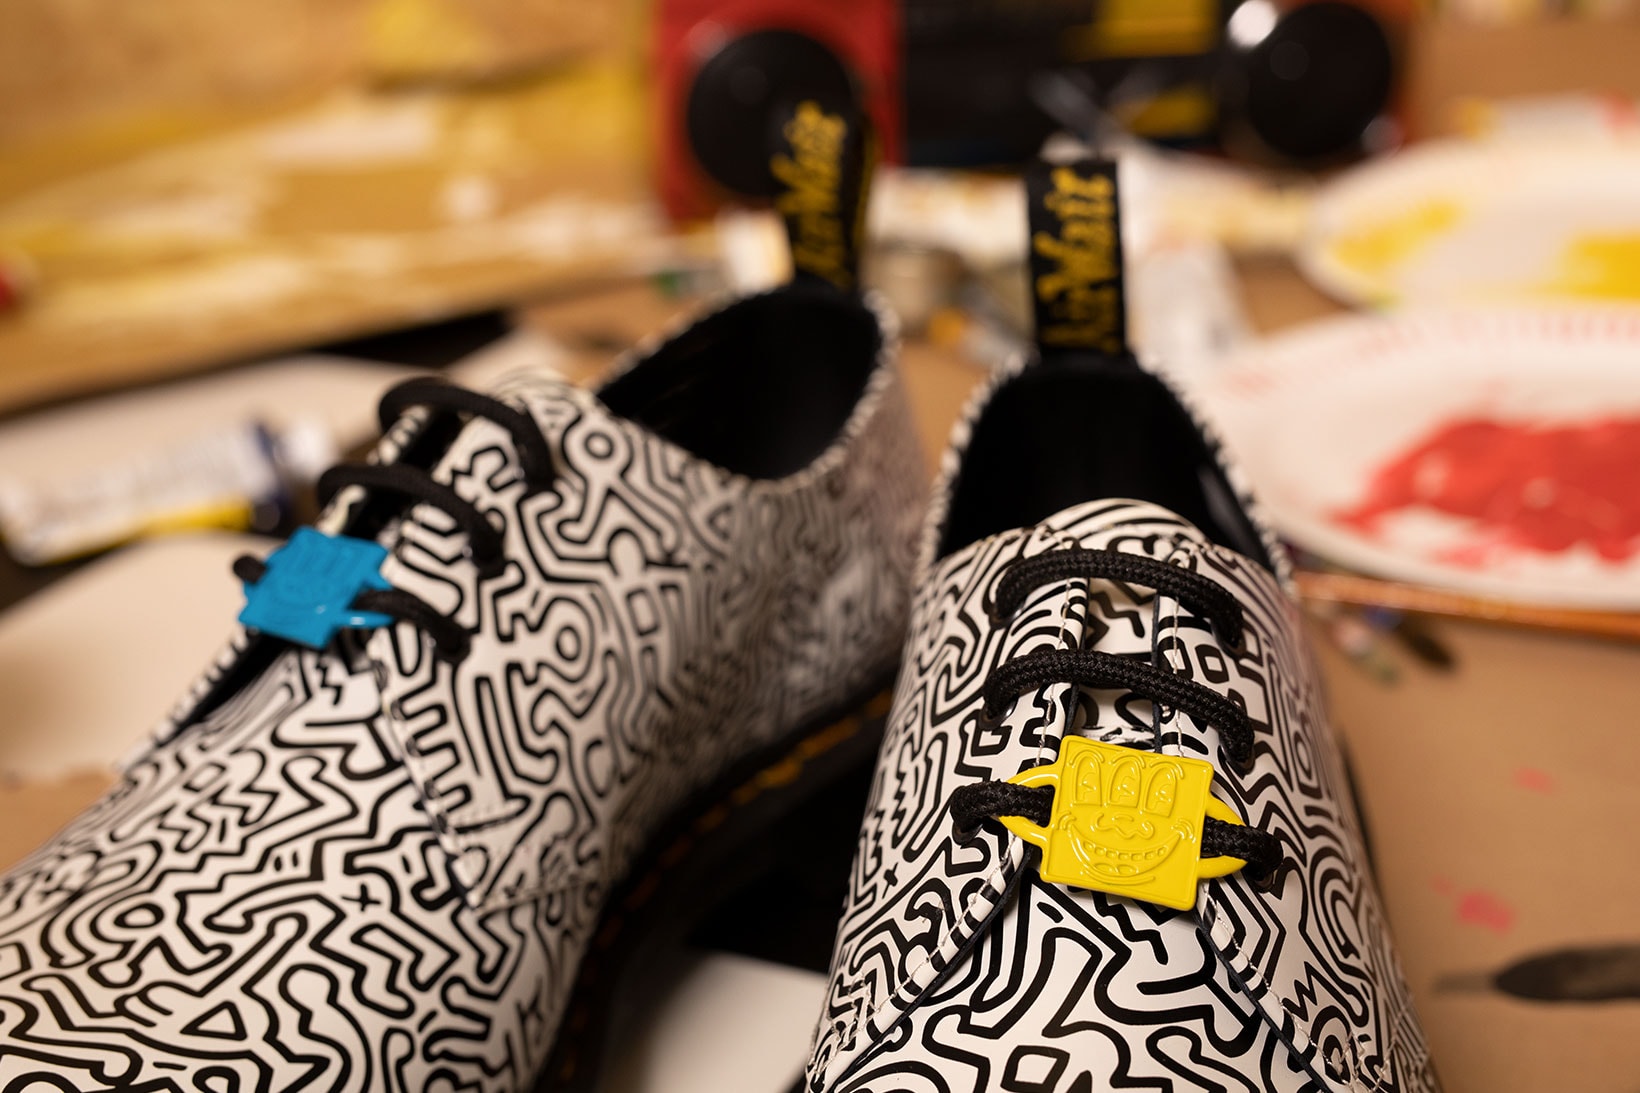 Dr. Martens Keith Haring Collaboration Boots Shoes 1461 Derby White Black Illustrations Drawings Art Charms Yellow Blue